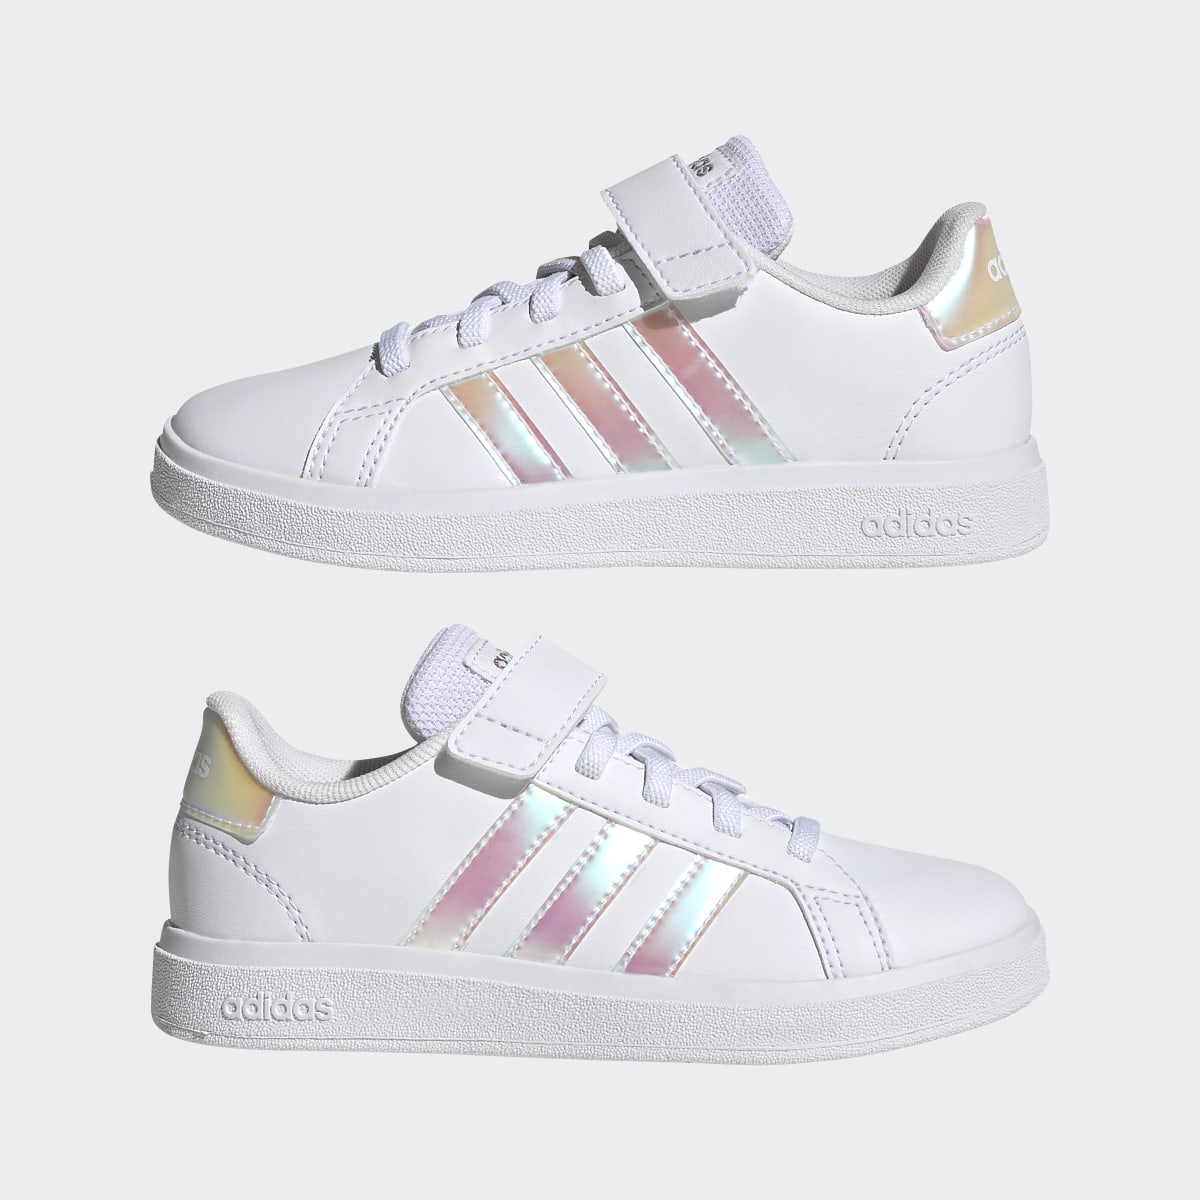 Adidas Grand Court 2.0 Shoes. 8